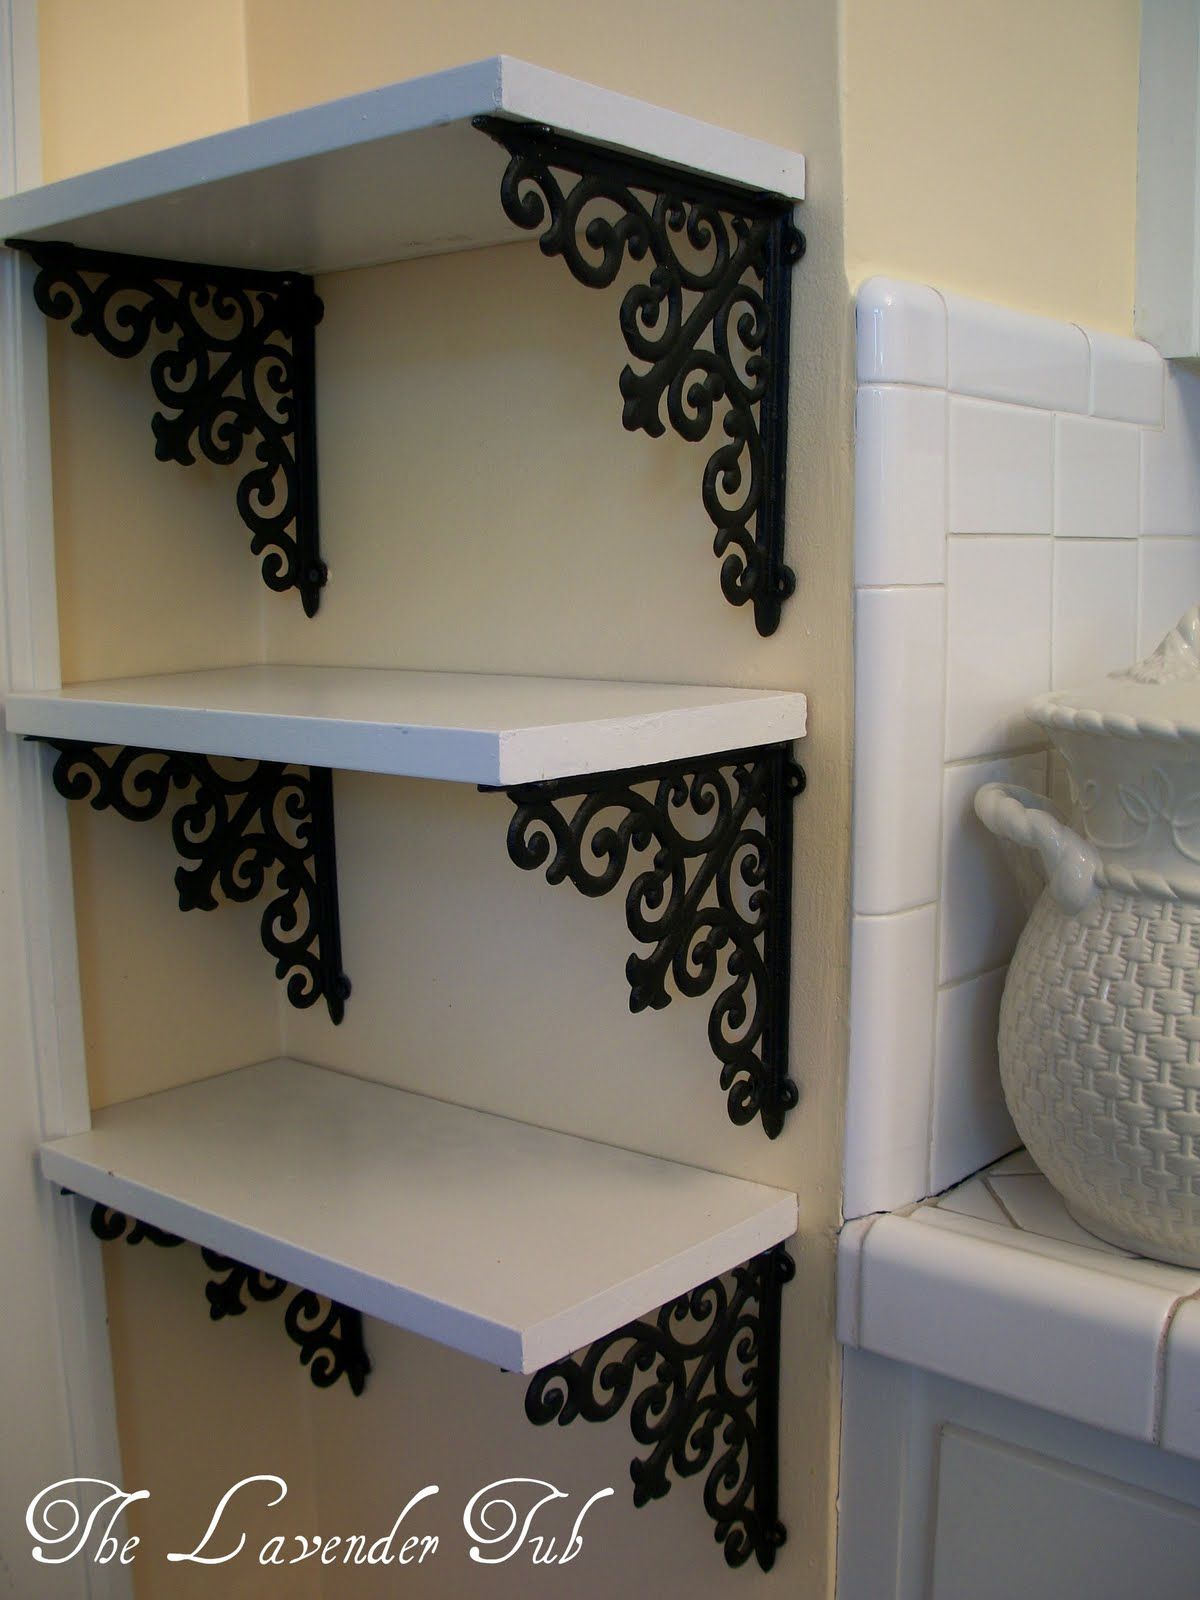 Brackets from hobby lobby and a piece of wood. DIY simple elegant shelves.